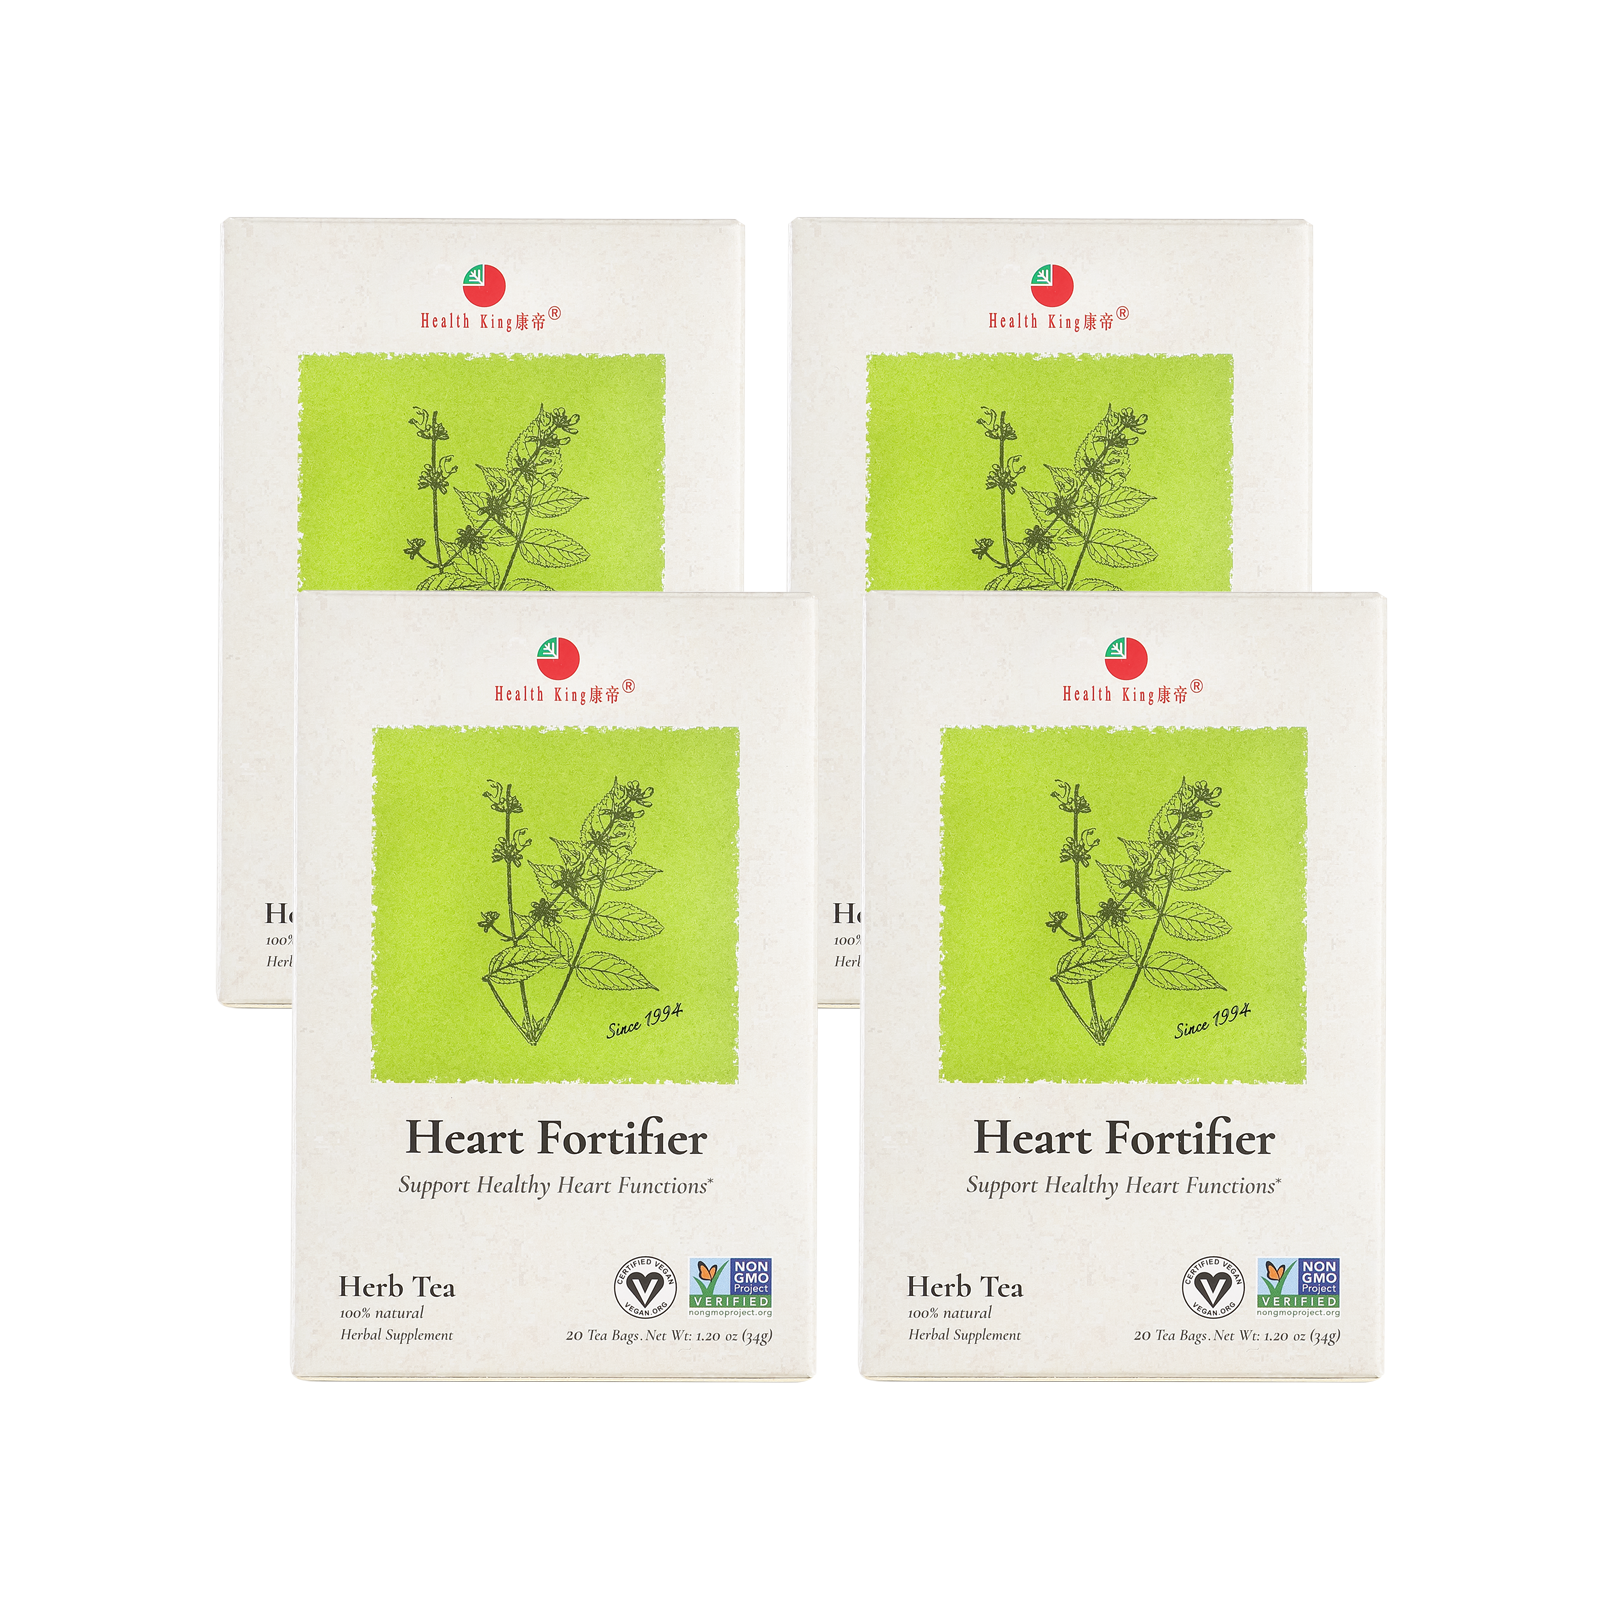 Four of Heart Fortifier Herb Tea packets against a white backdrop